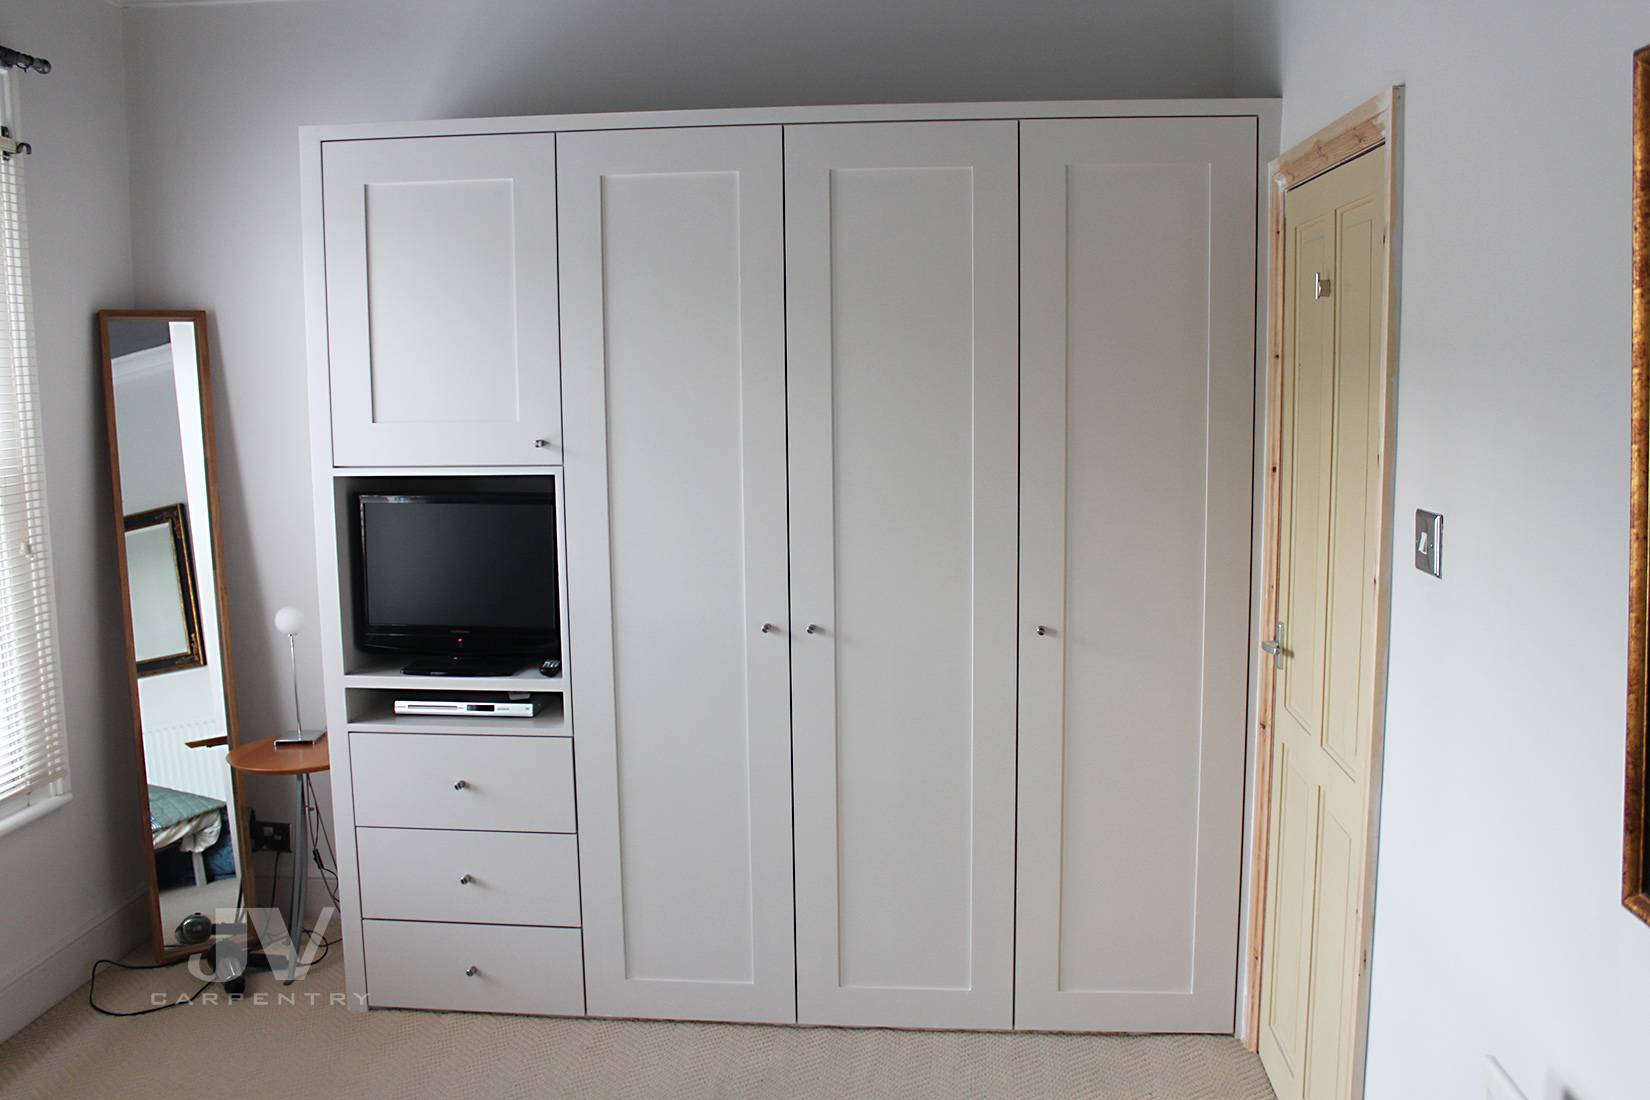 Small built-in wardrobe in the corner of the bedroom by the door. Painted slightly offwite colour